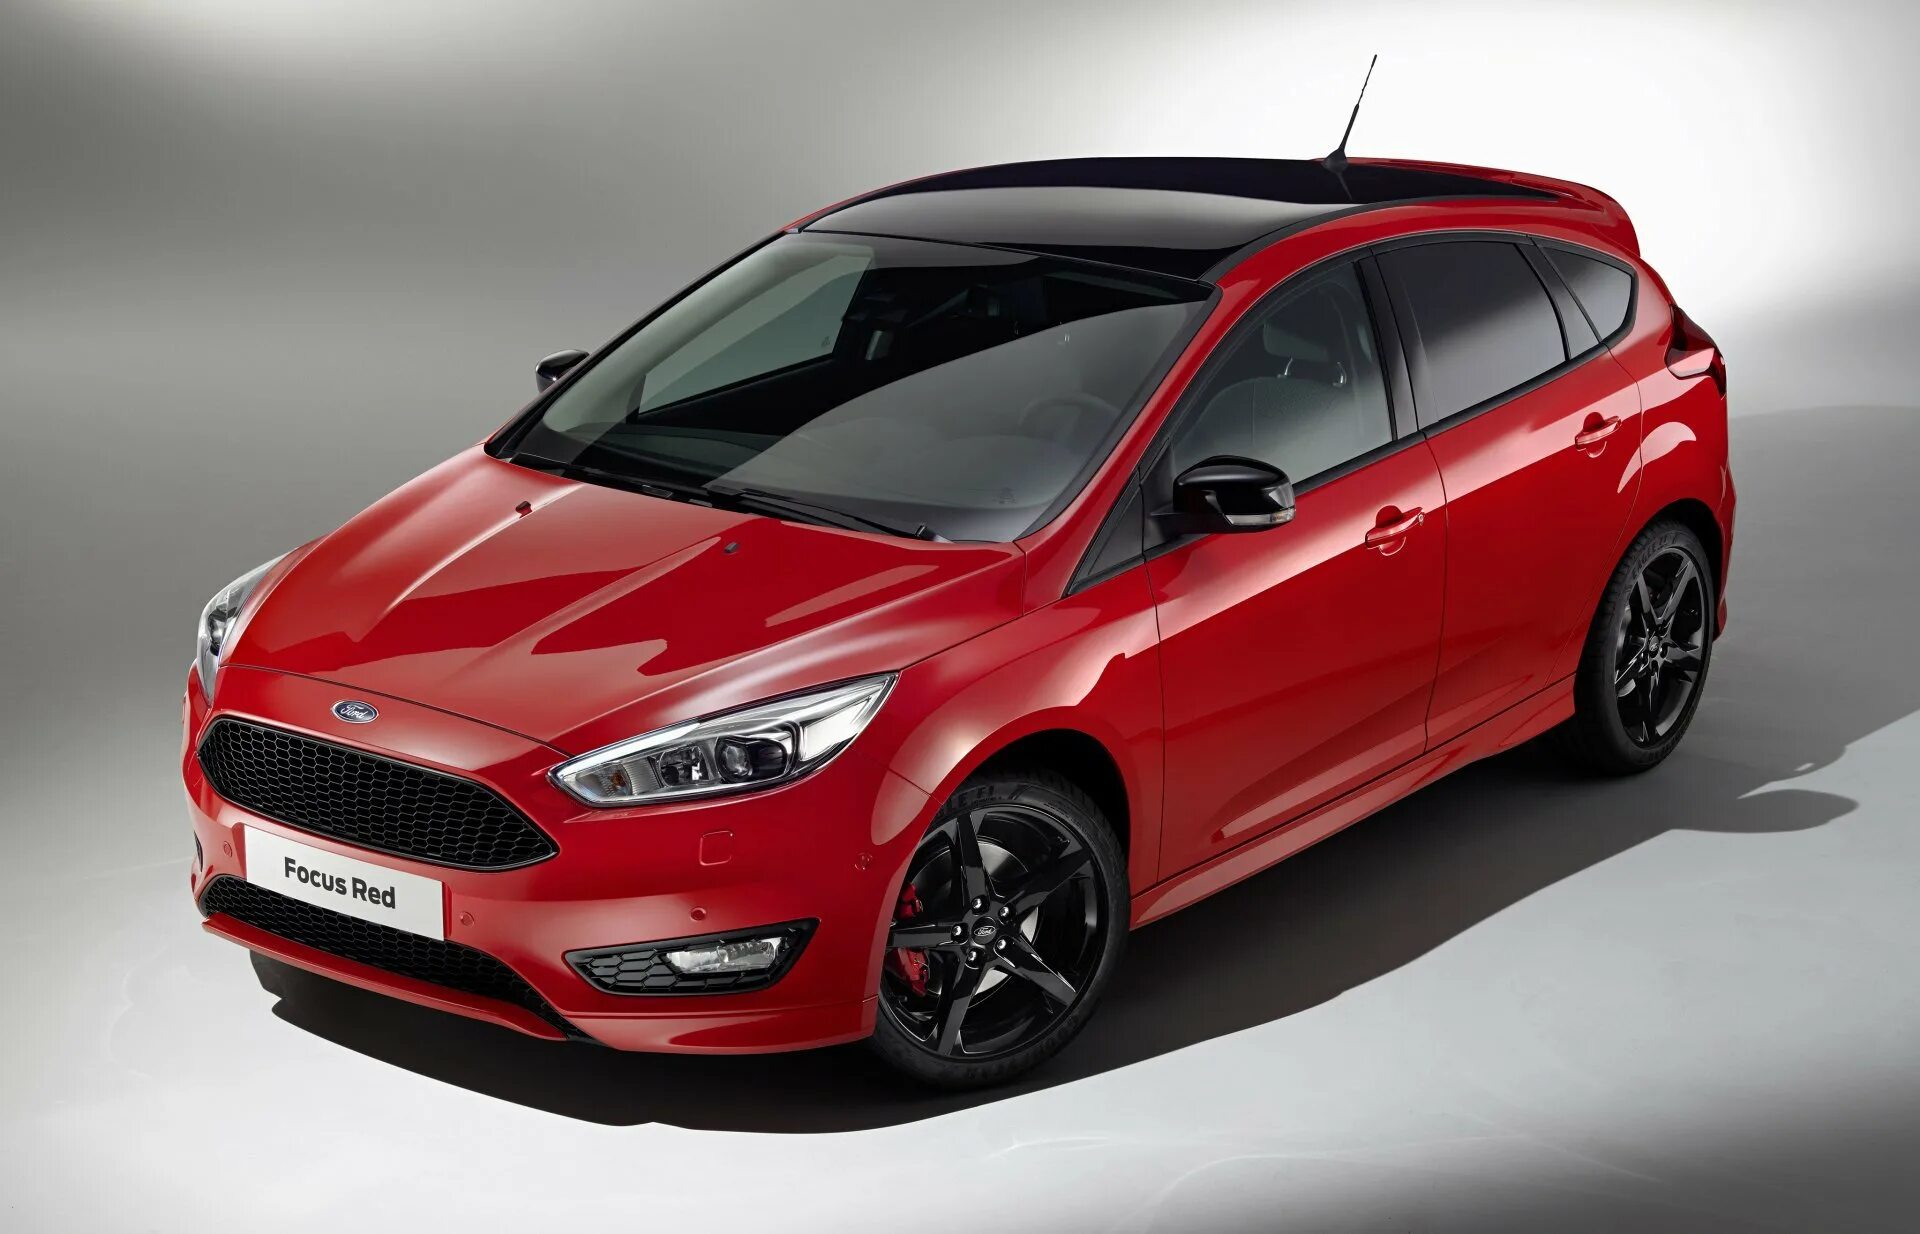 Машина форд фото. Ford Focus 2015 Red. Ford Focus 3 Restyling Red. Форд фокус 2015 красный. Ford Focus 10.